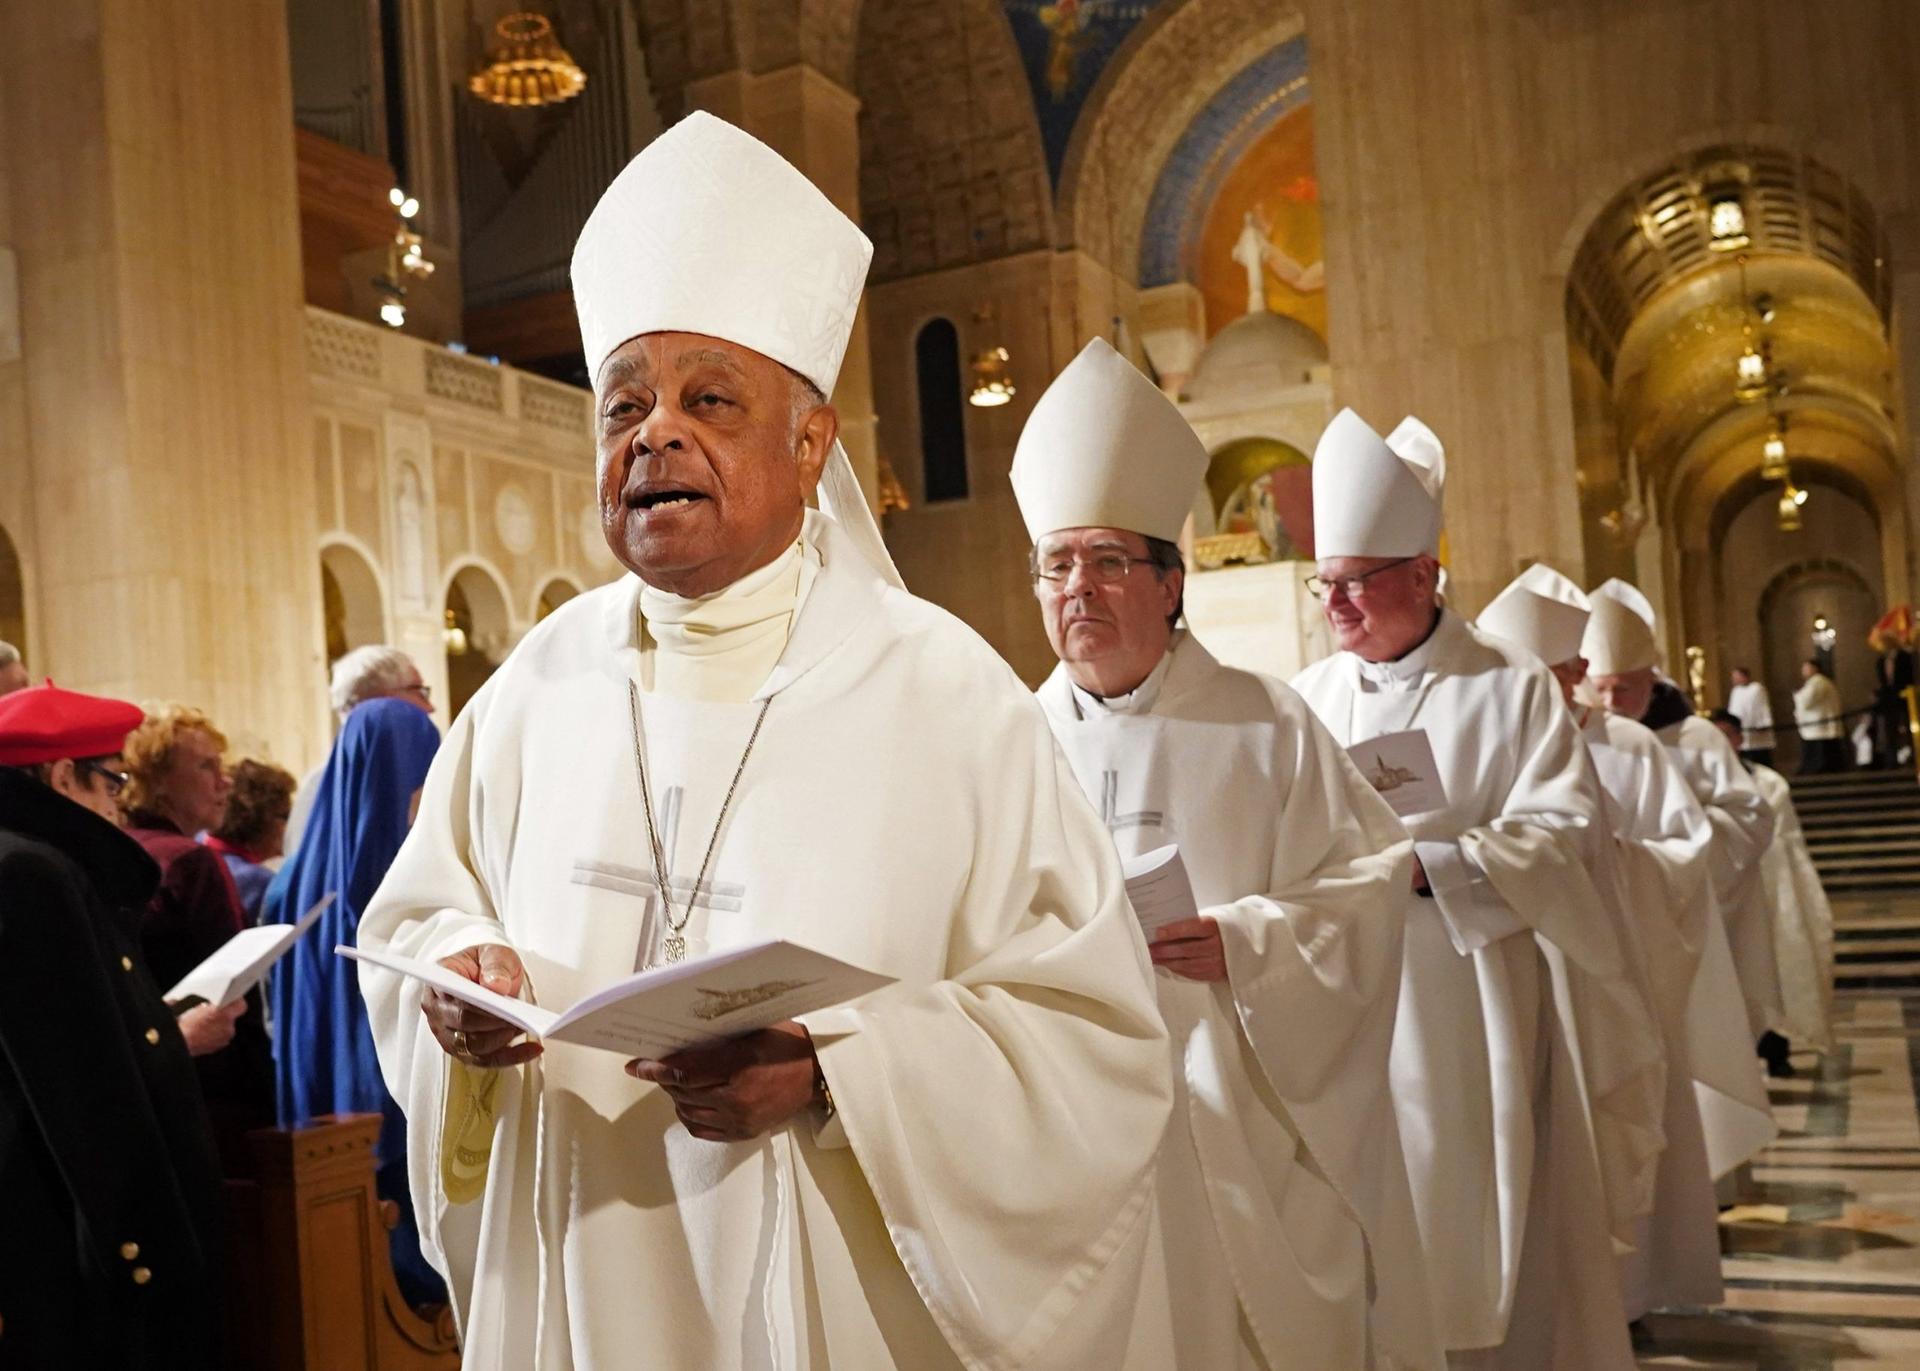 An outpouring of support for first African American cardinal